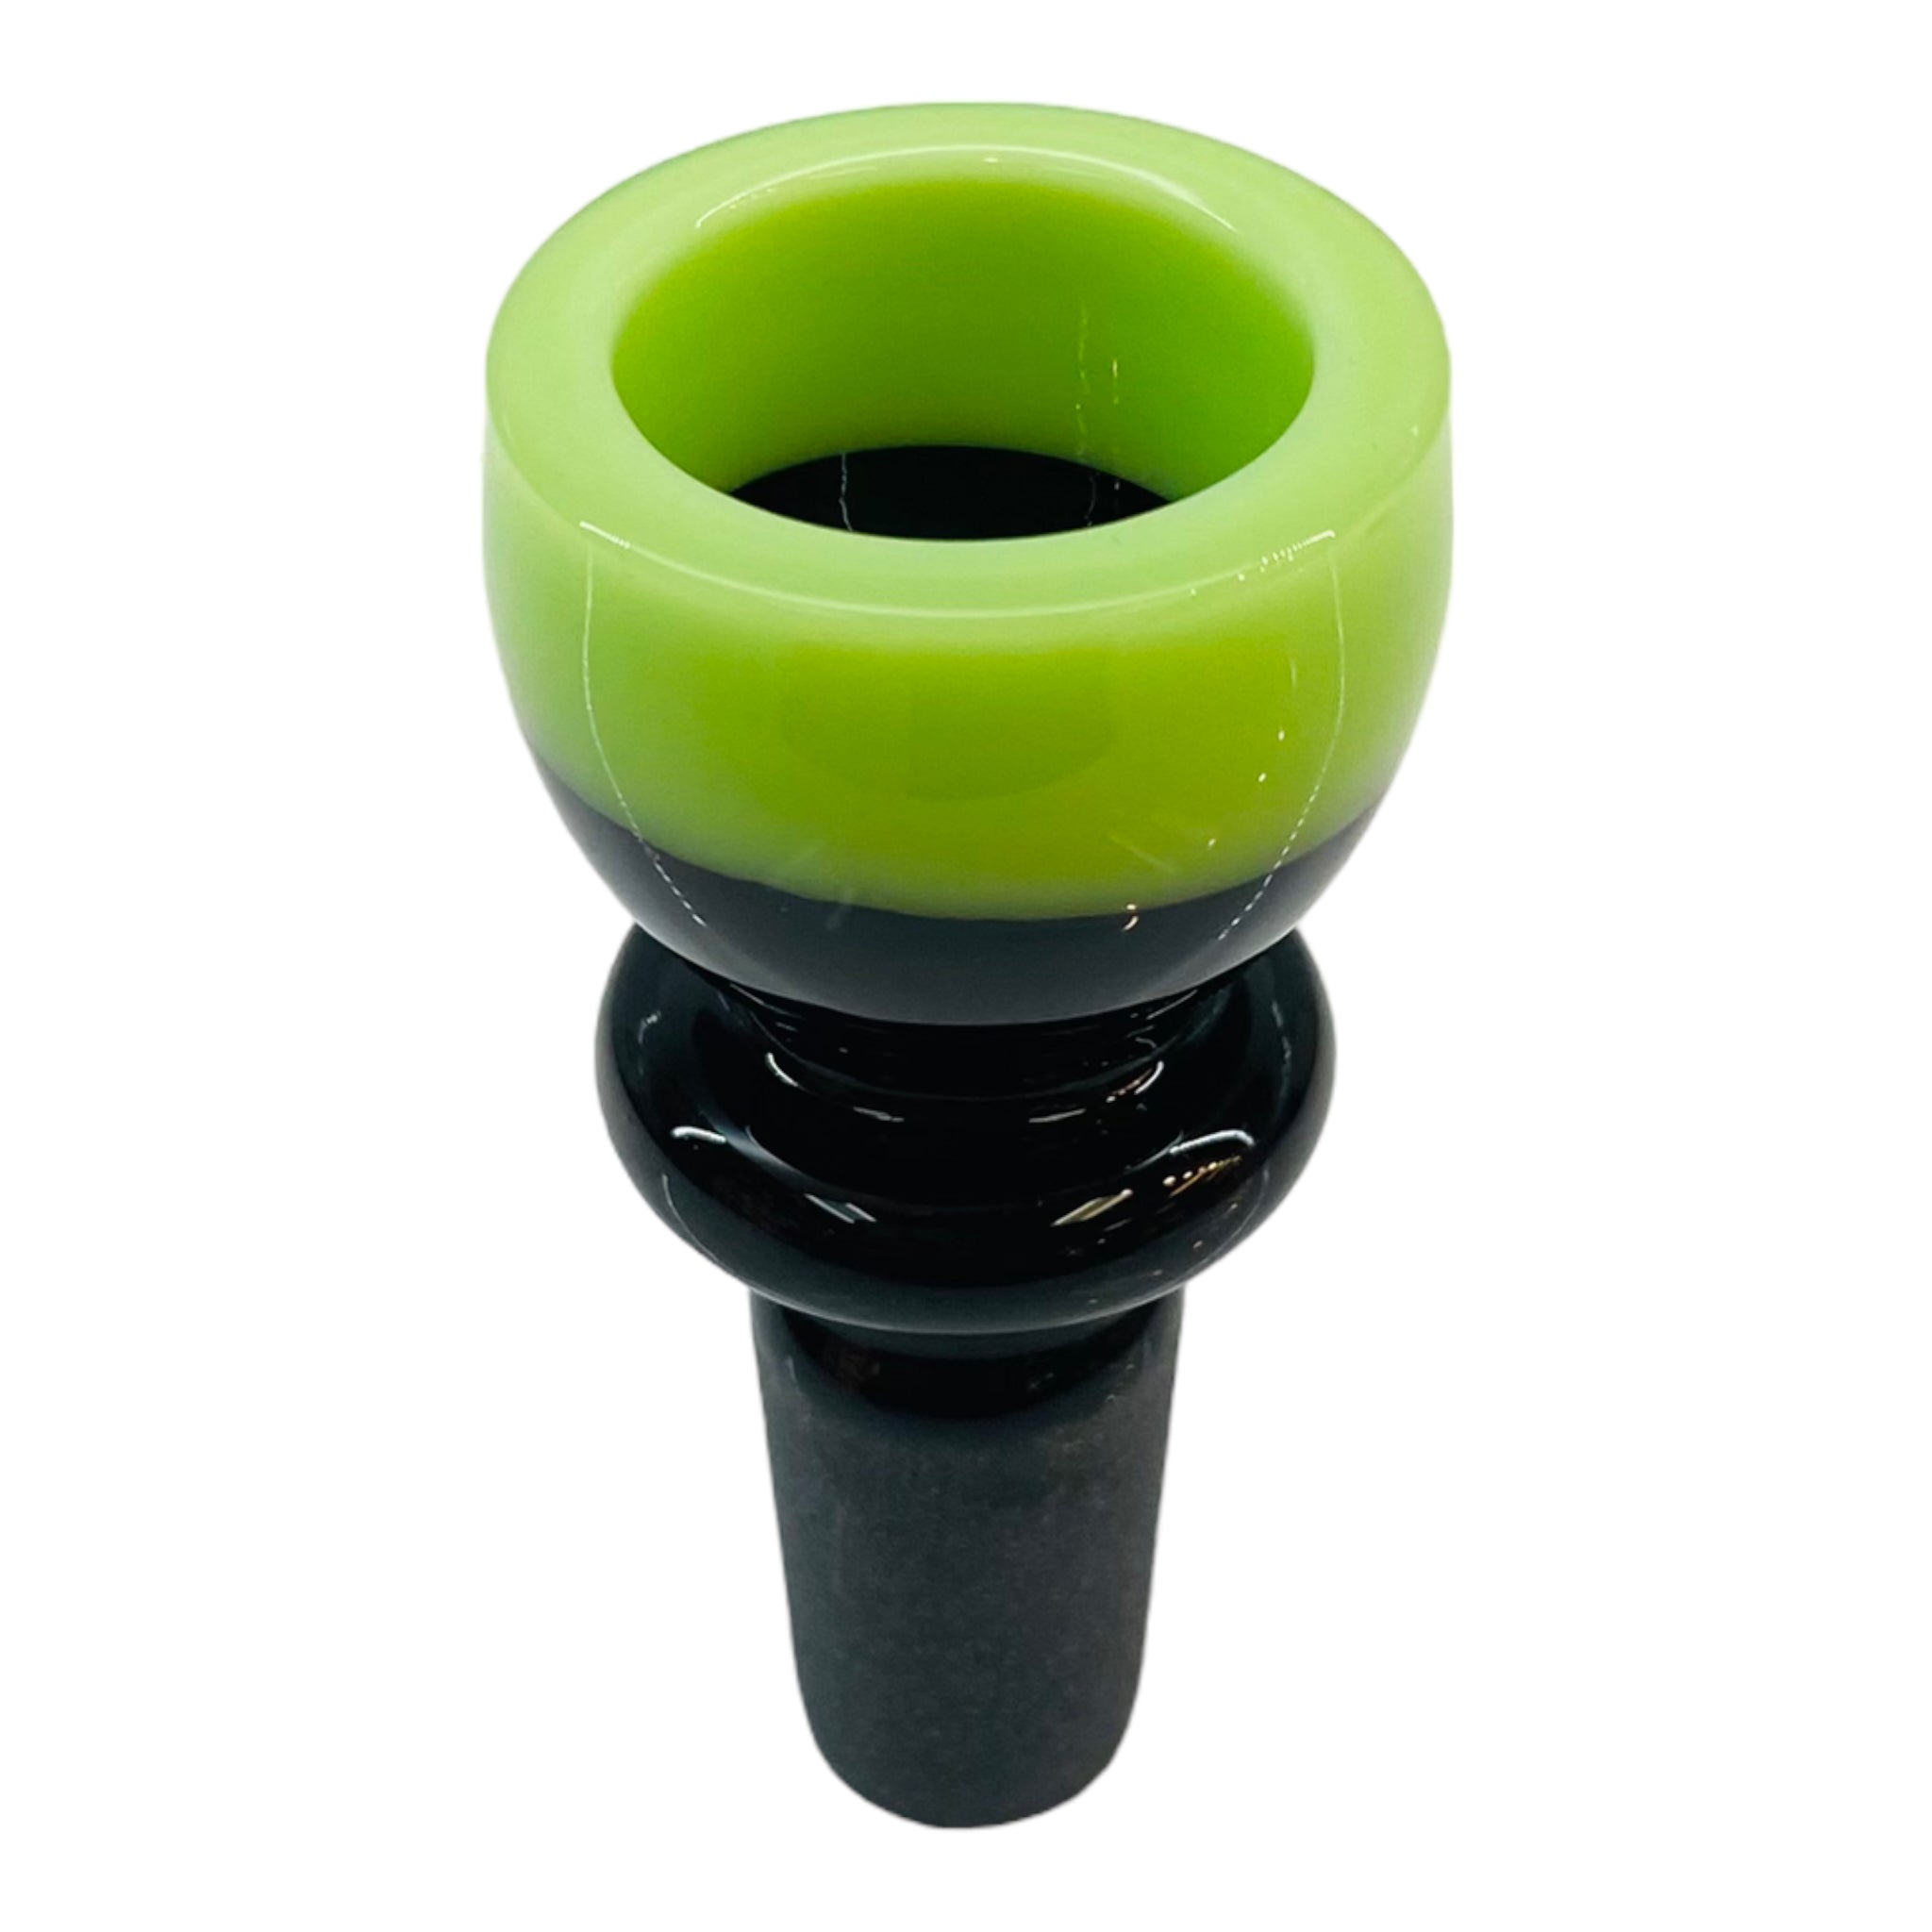 14mm Flower Bowl - Black Fitting With Color Rim - Slime Green